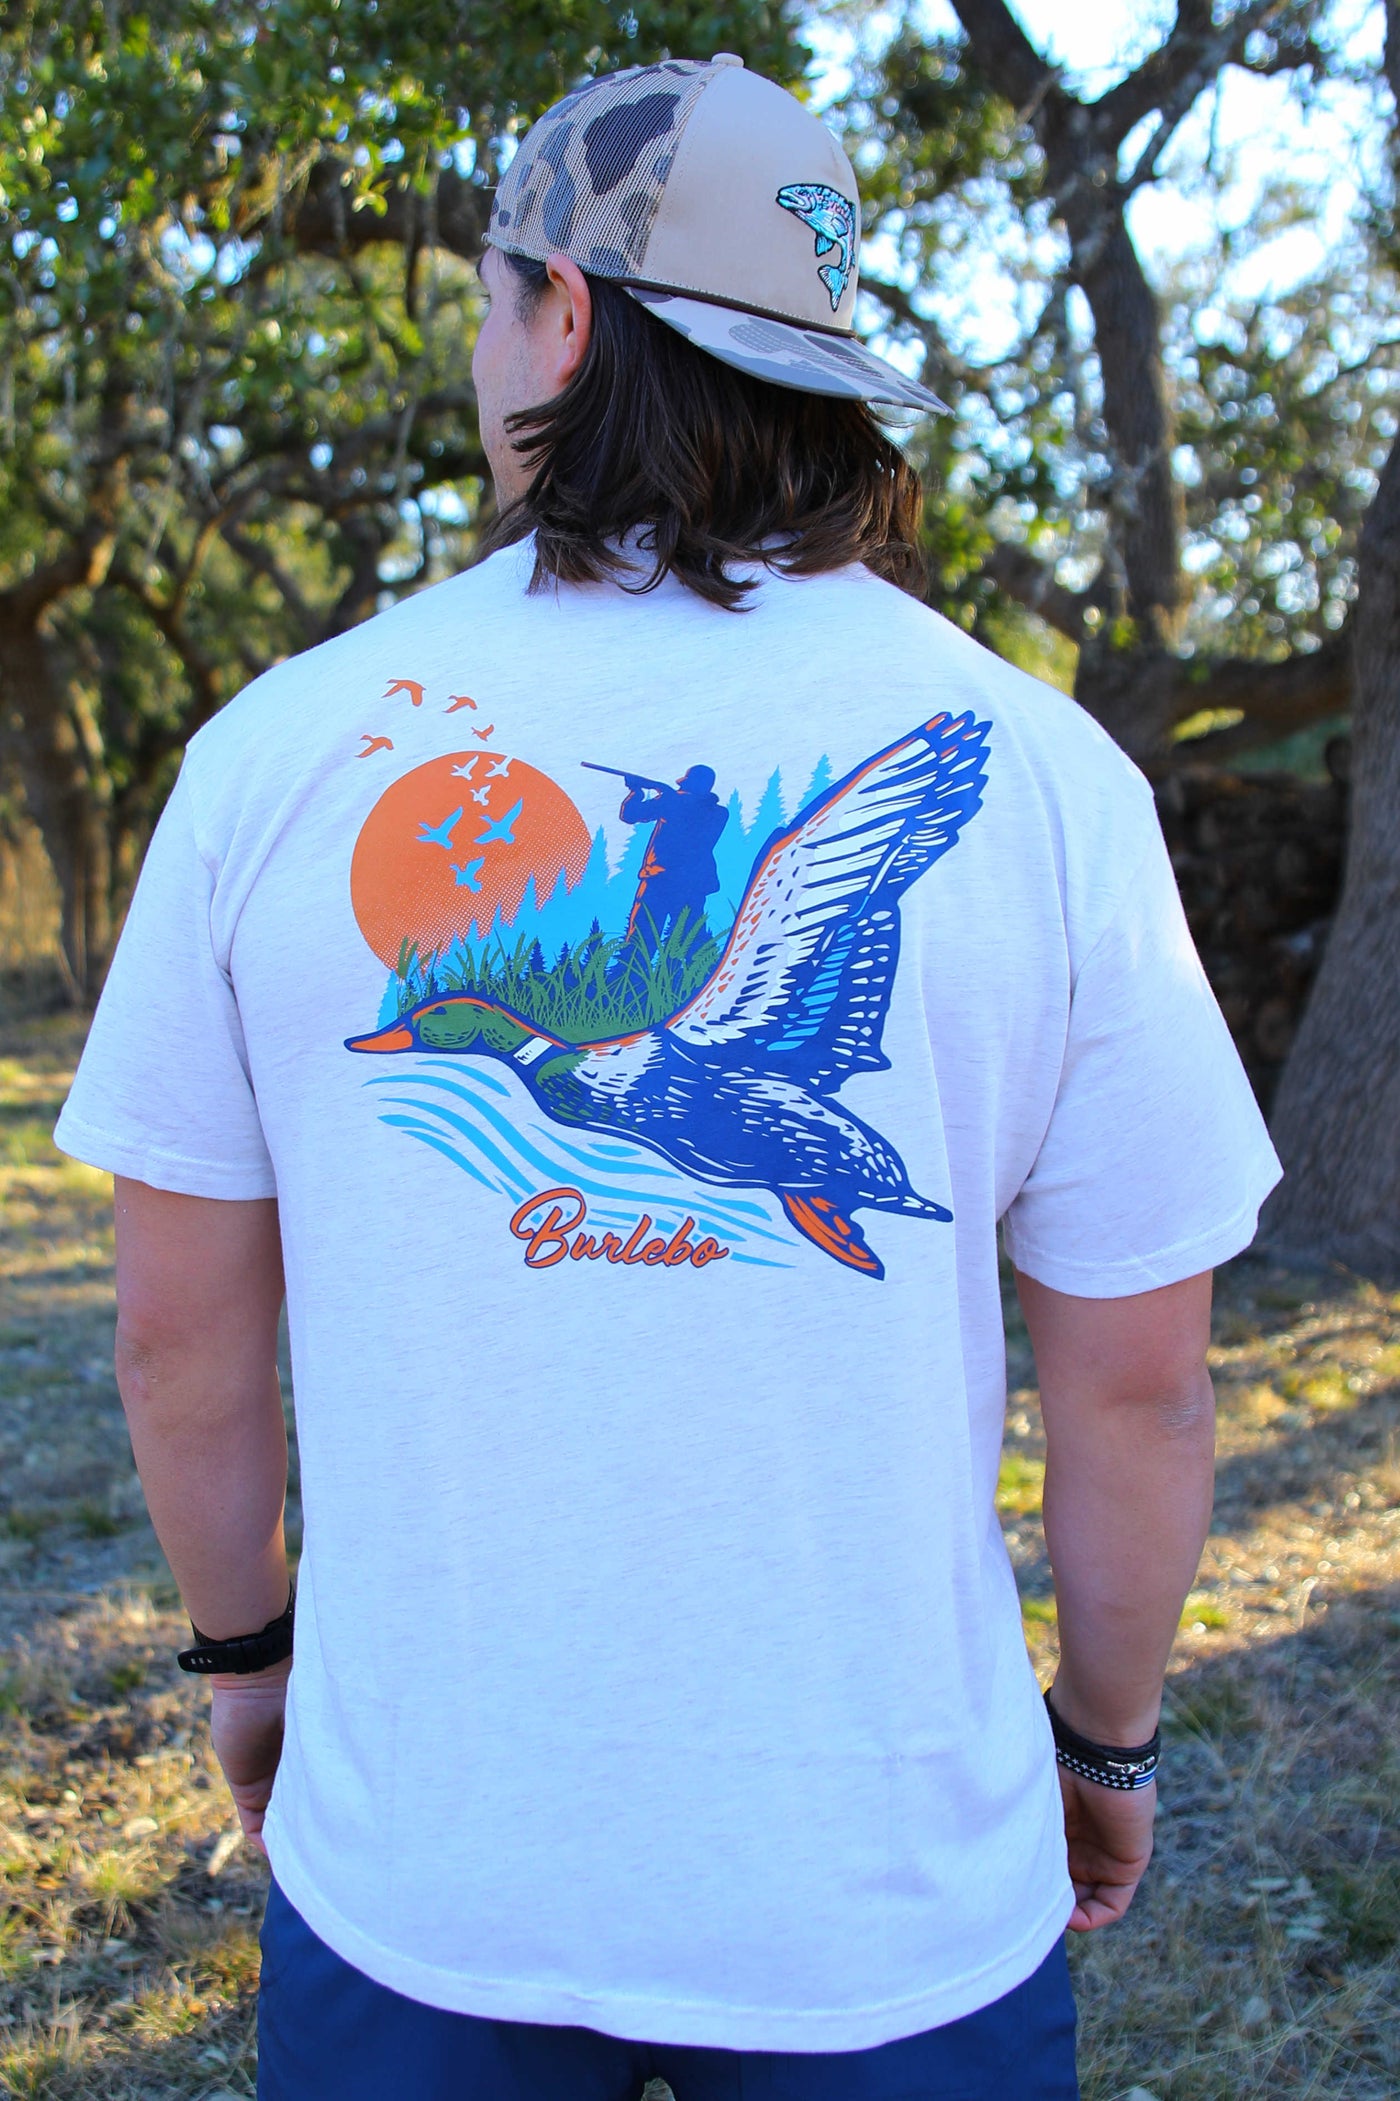 Light grey tshirt with a duck and a hunter on the back